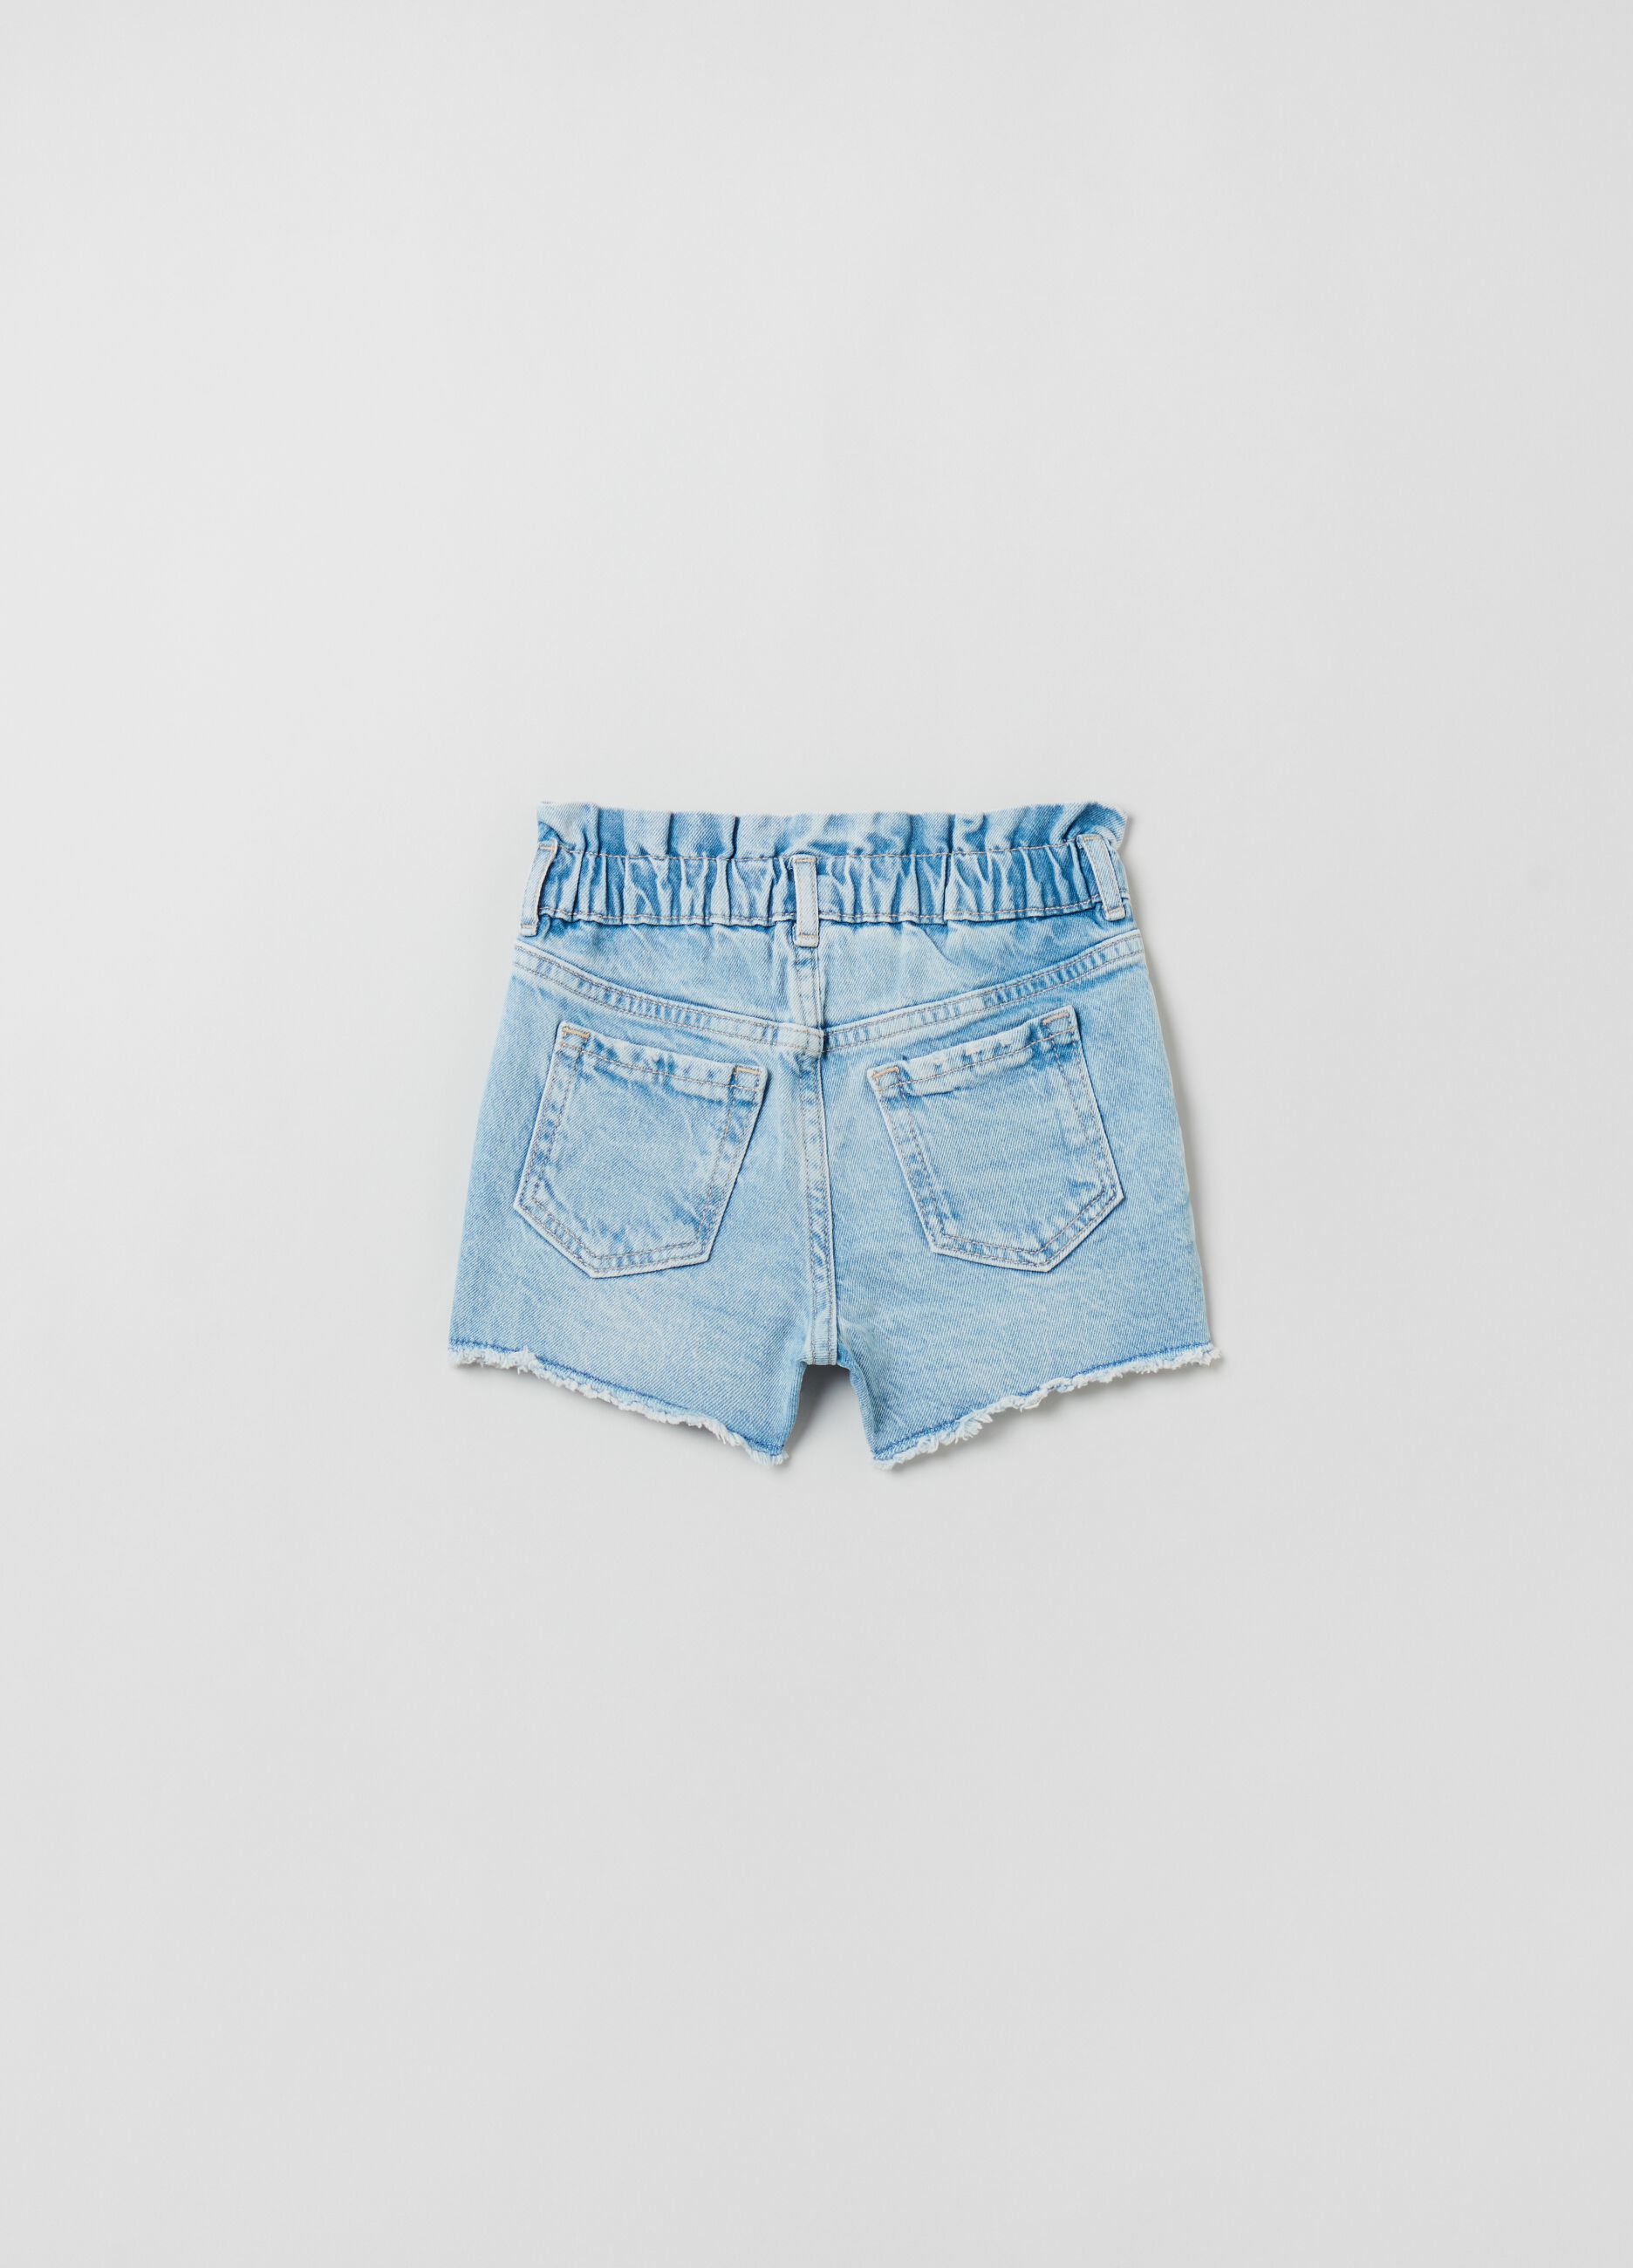 Mum-fit shorts with pockets_1